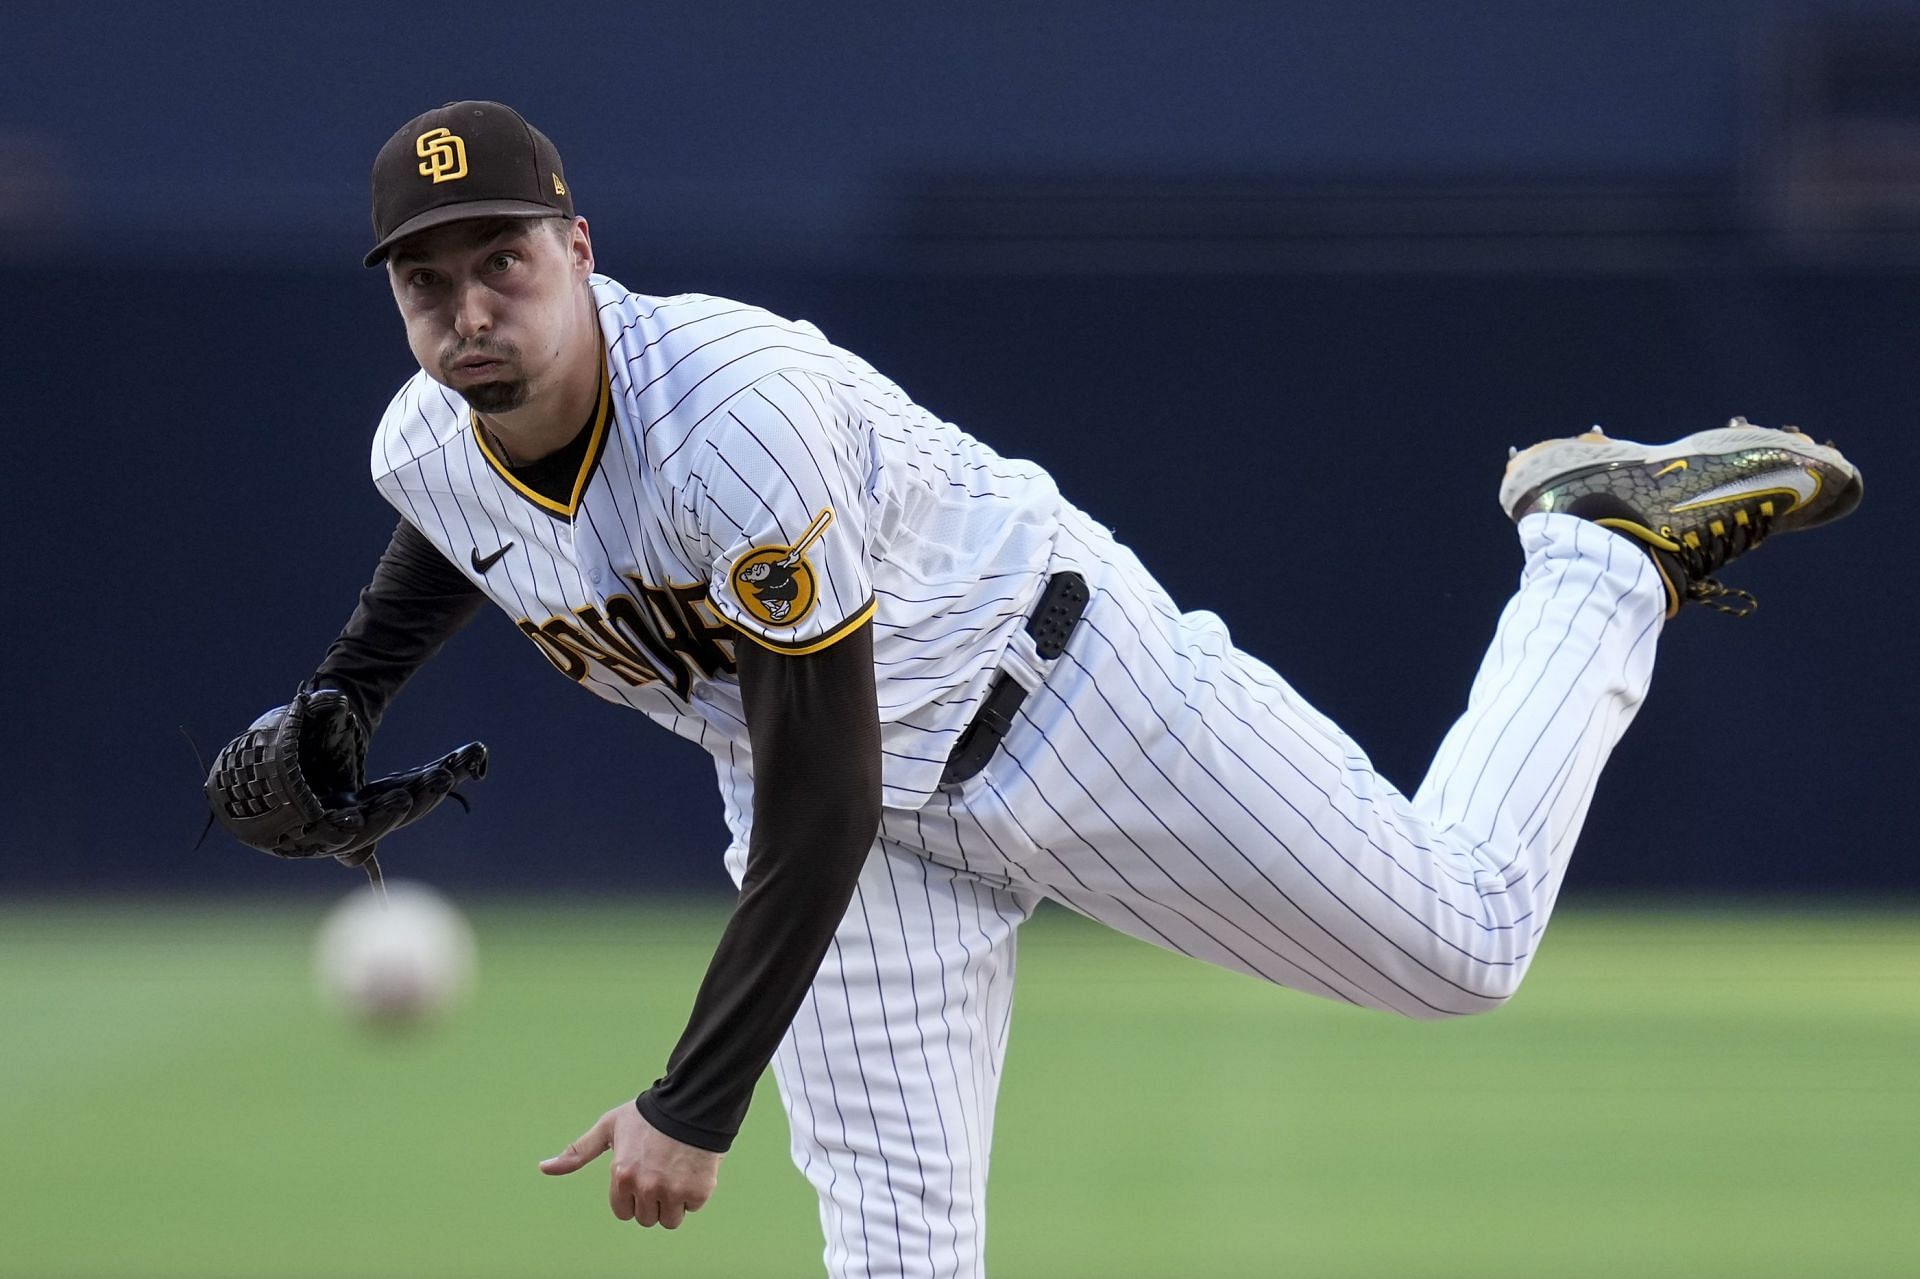 San Diego Padres starting pitcher Blake Snell works against a San Francisco Giants in San Diego